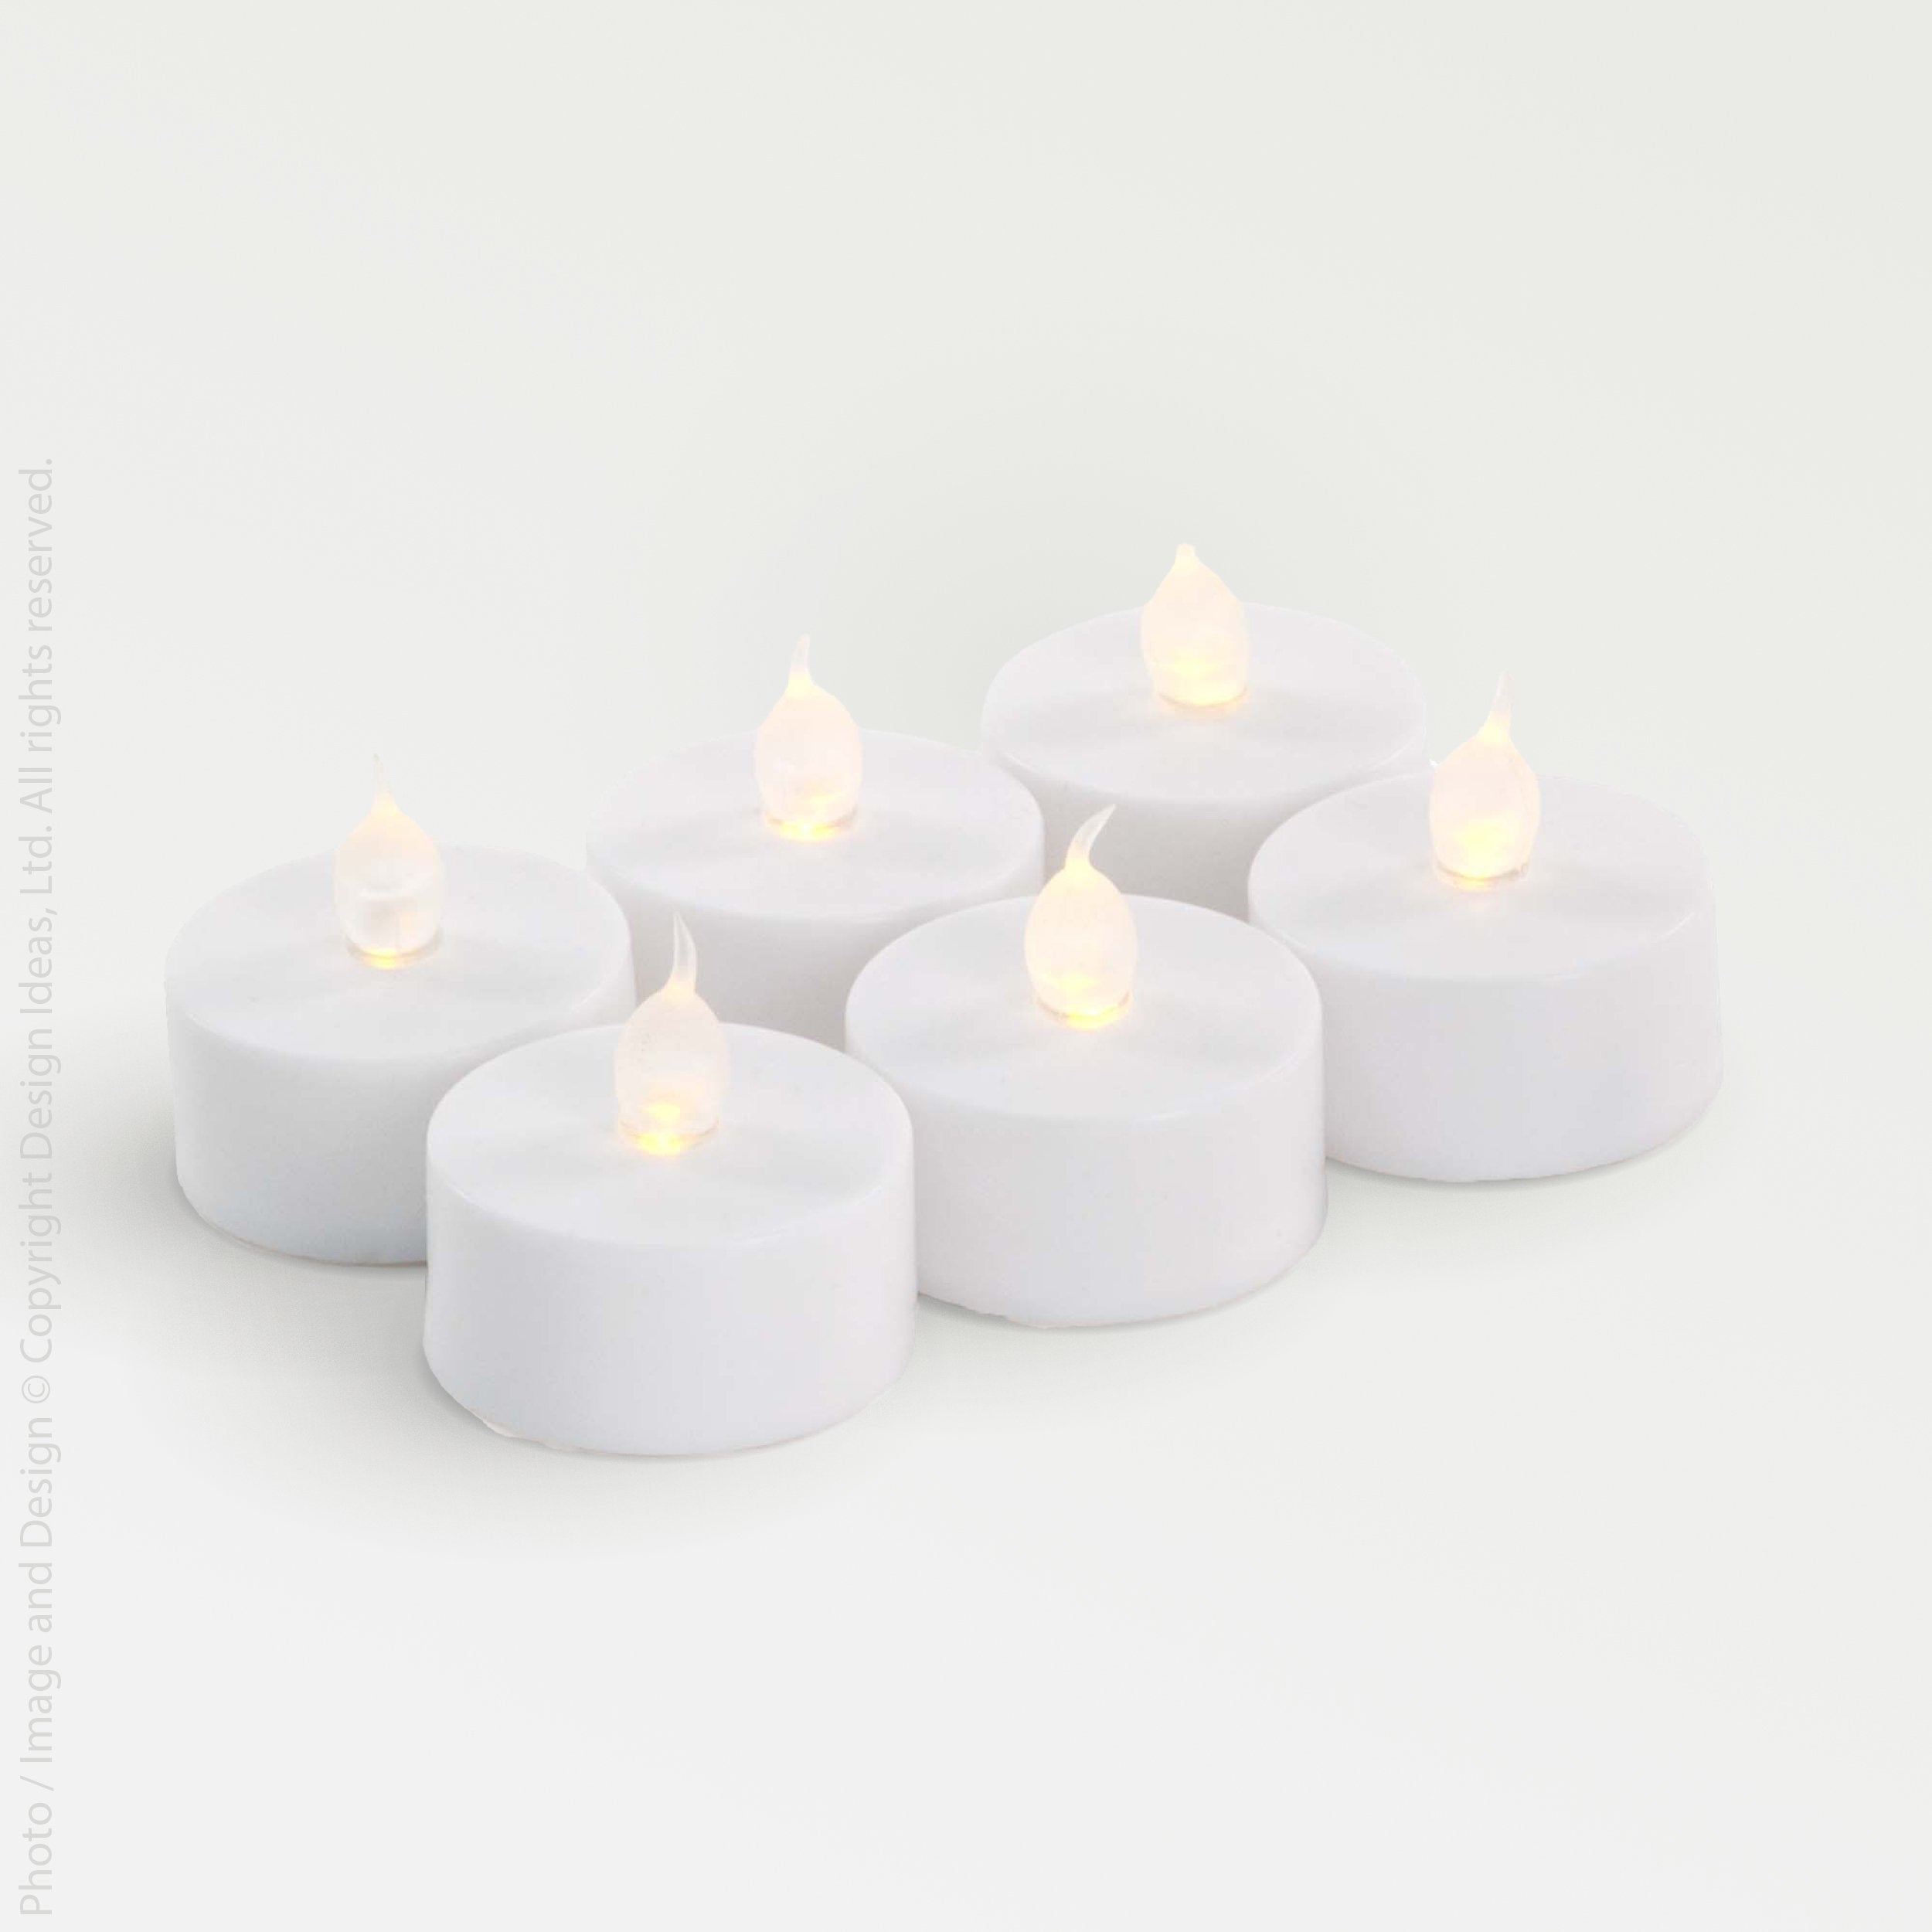 Flameless Tealights - Natural Color | Image 1 | From the Plastic Collection | Elegantly handmade with natural  for long lasting use | Available in white color | texxture home